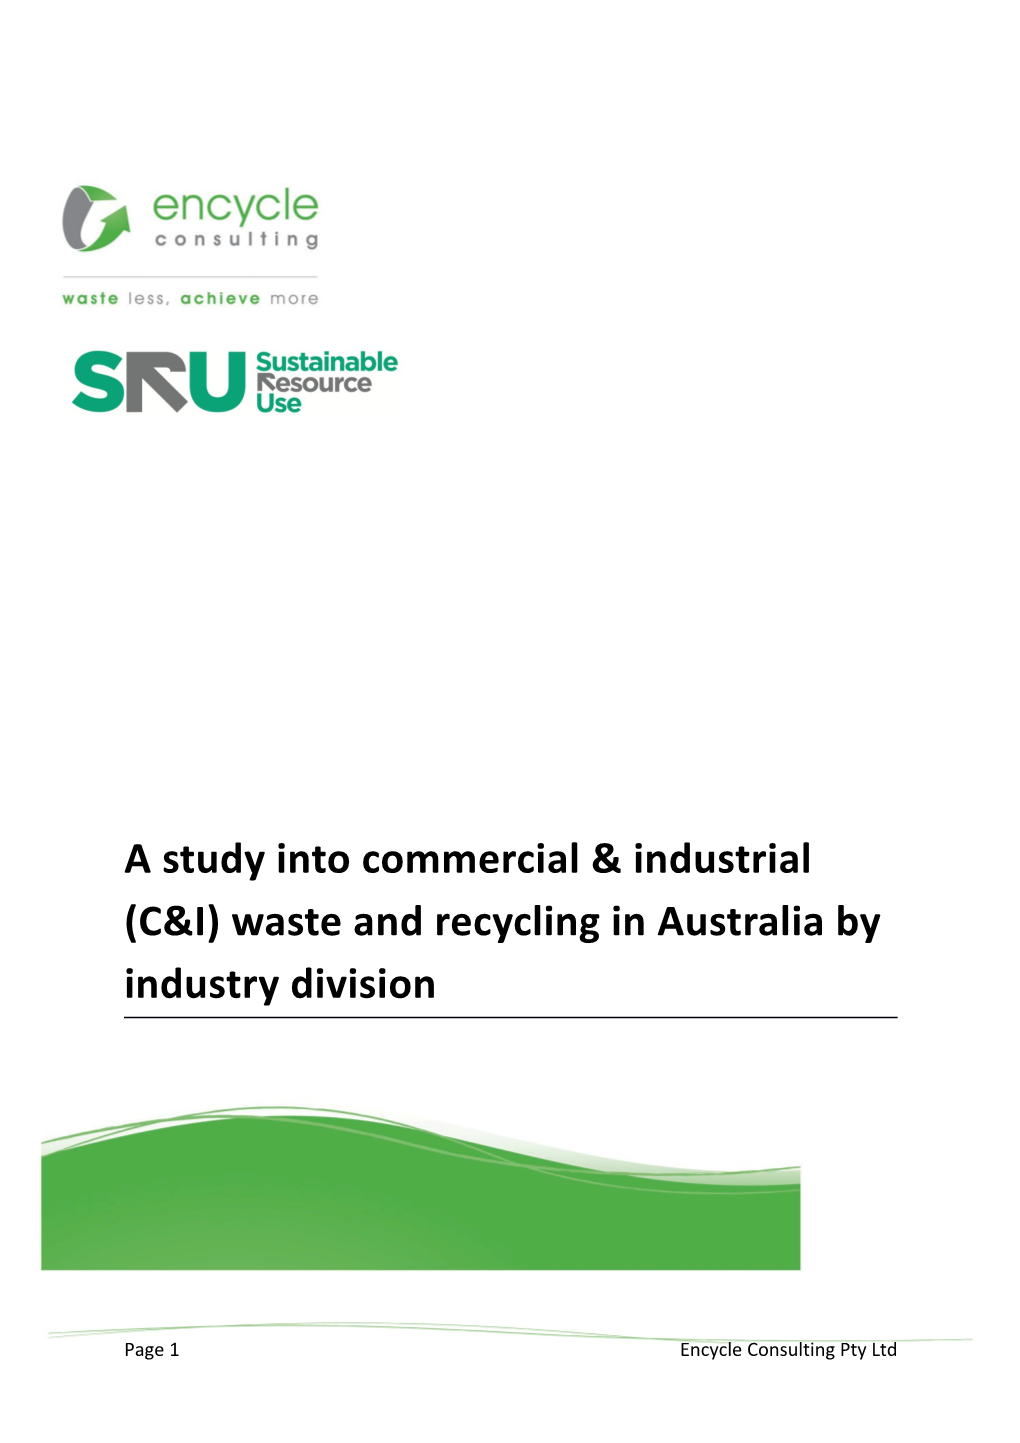 A Study Into Commercial & Industrial (C&I) Waste and Recycling in Australia by Industry Division